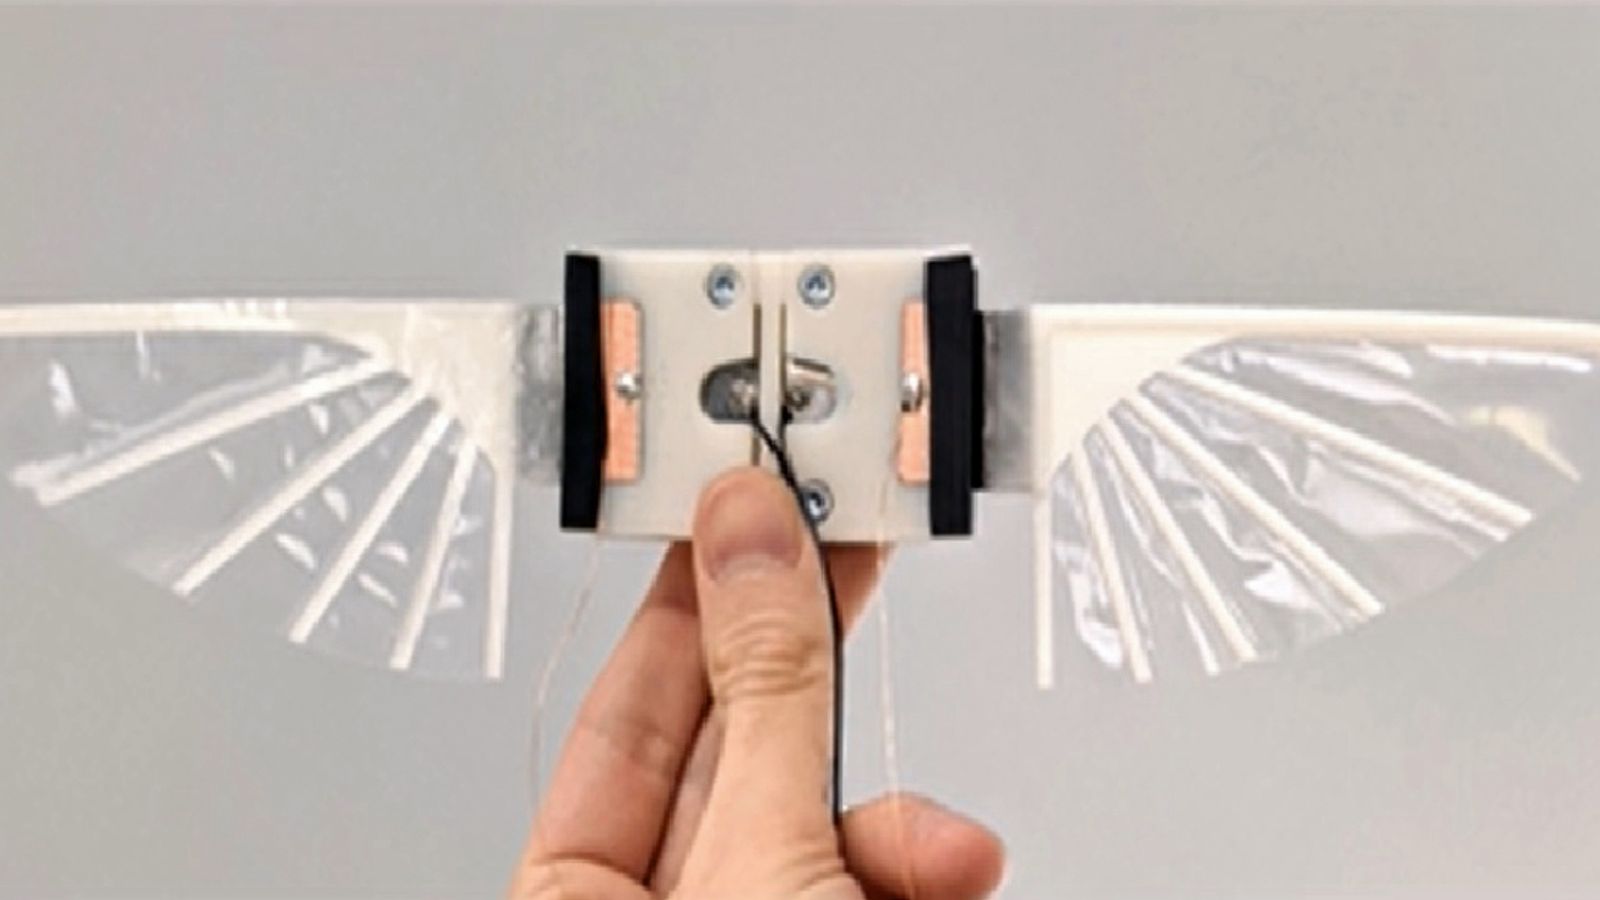 Scientists develop insect-sized robots that flap their wings to fly